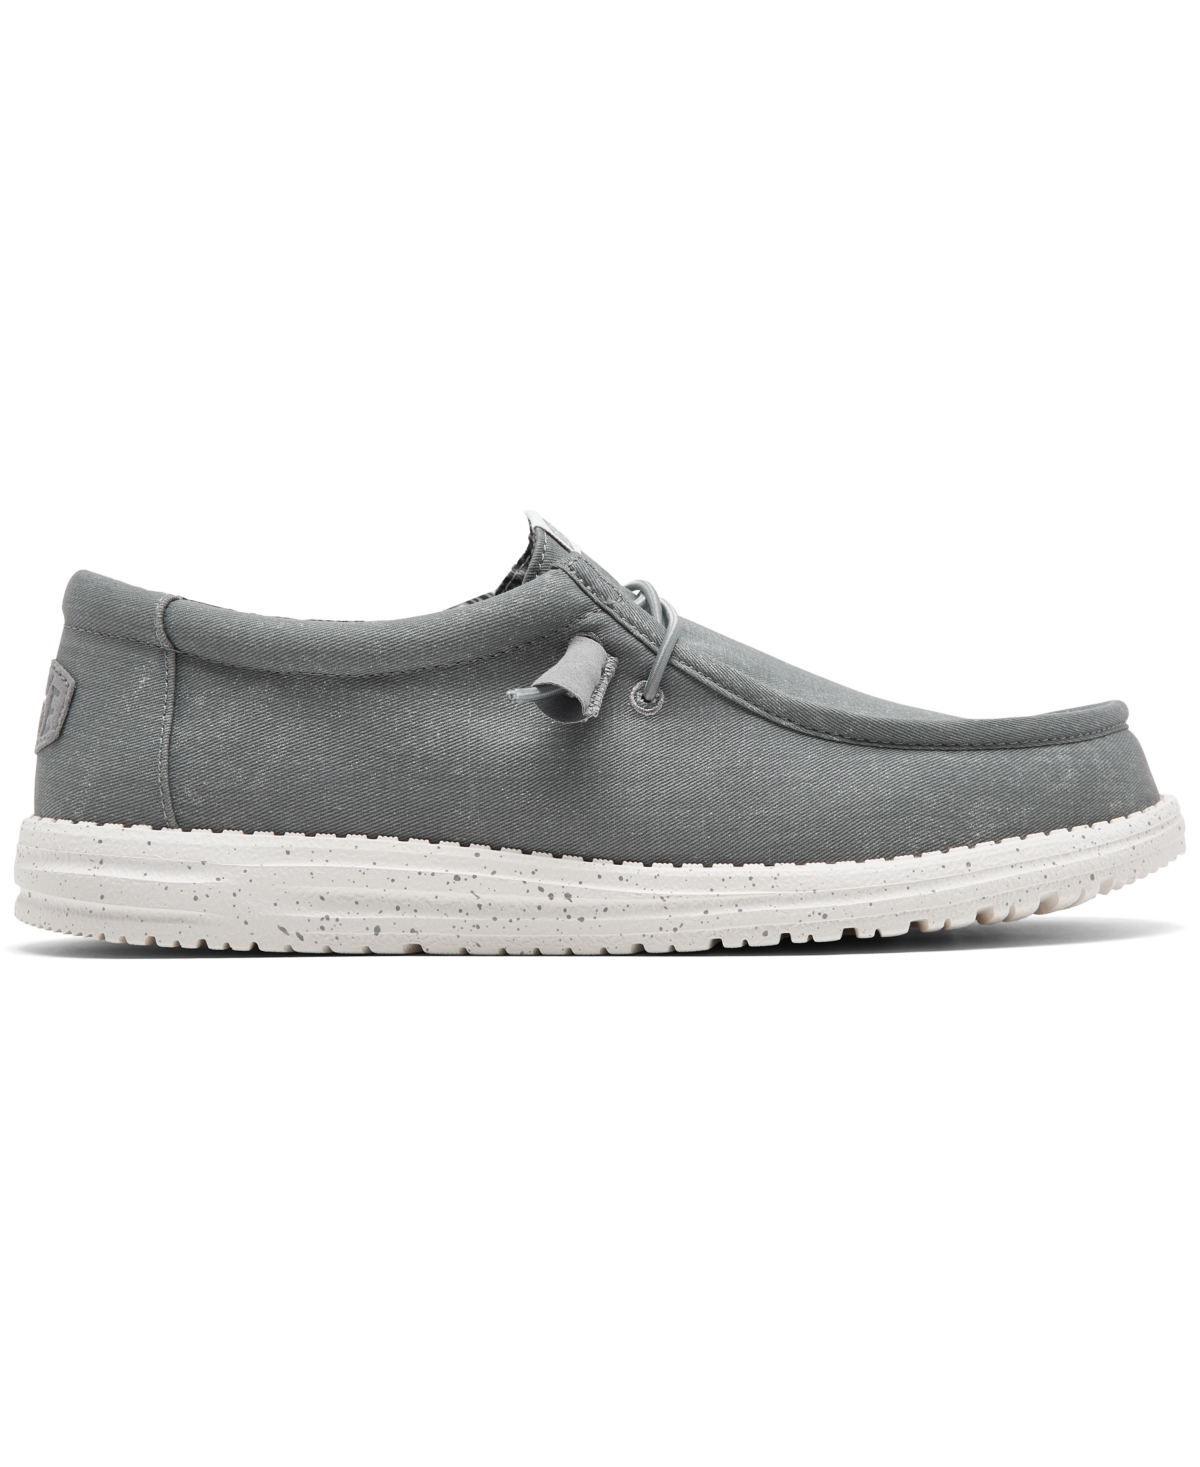 Shop Hey Dude Men's Wally Canvas Casual Moccasin Sneakers From Finish Line In Iron